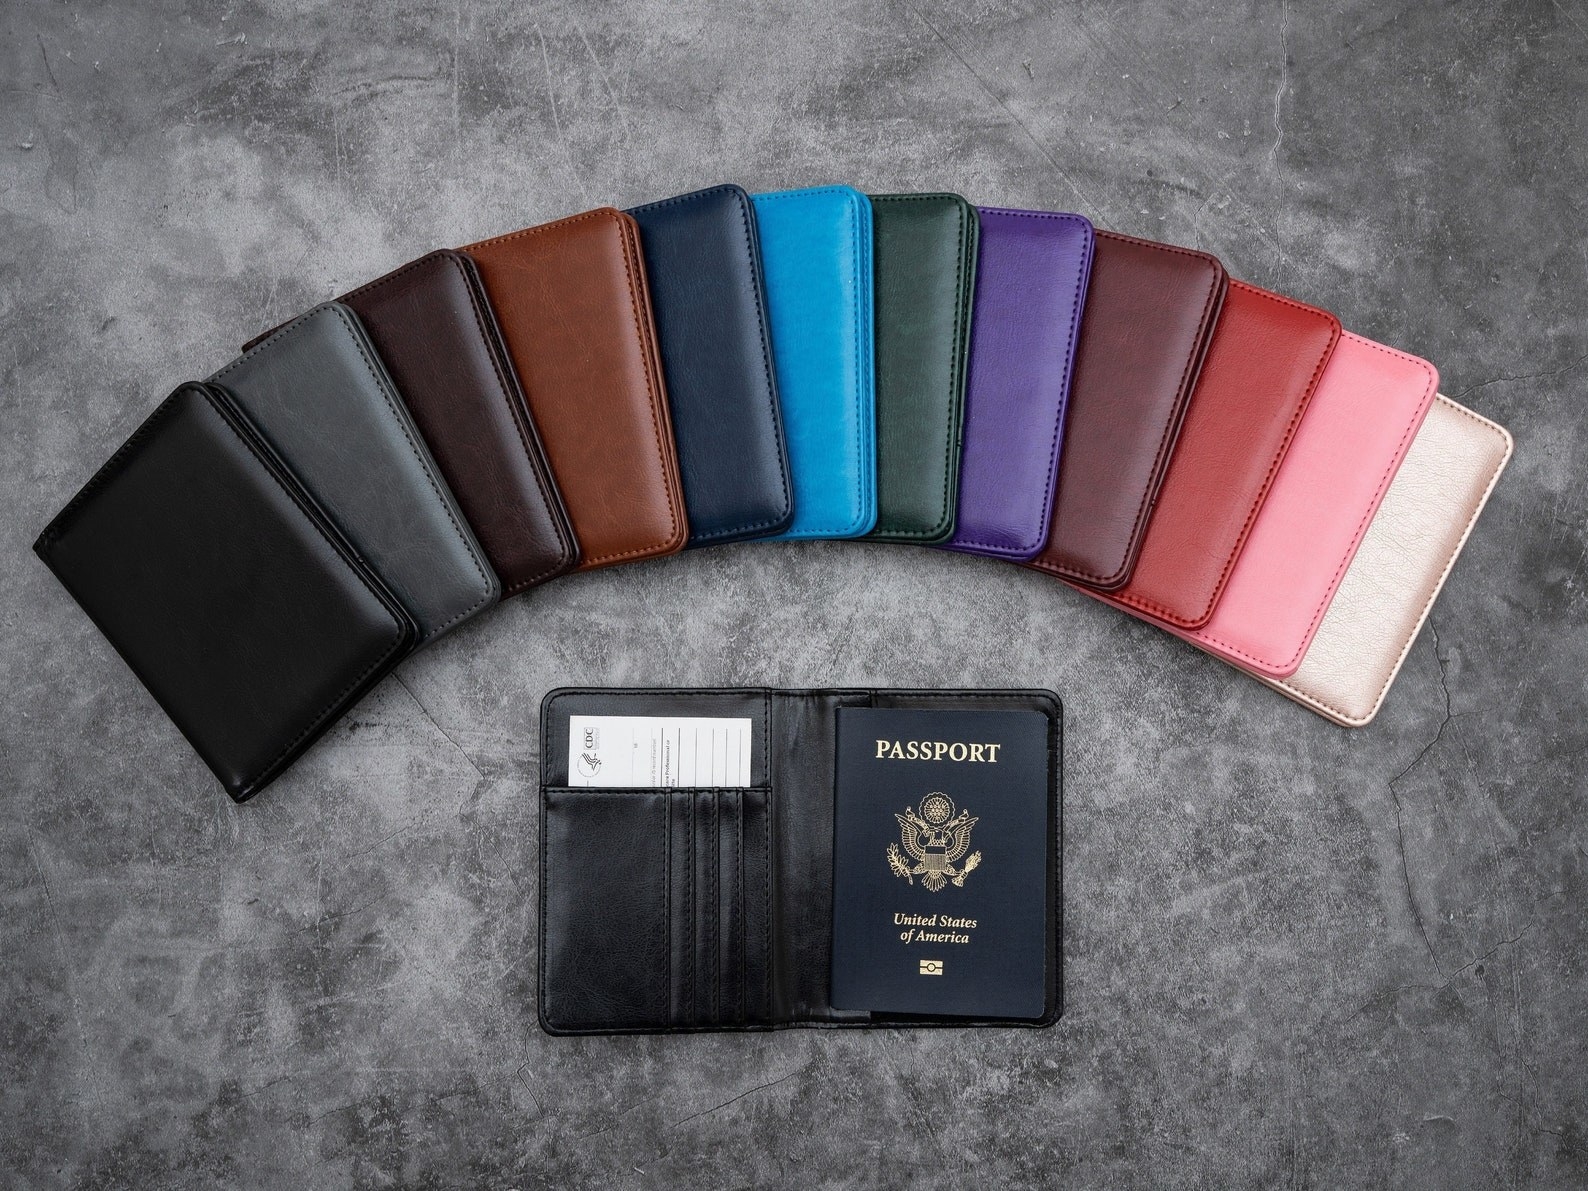 the leather holder, which has a slot for cards, a pocket for you vaccine card, and a holder for your passport